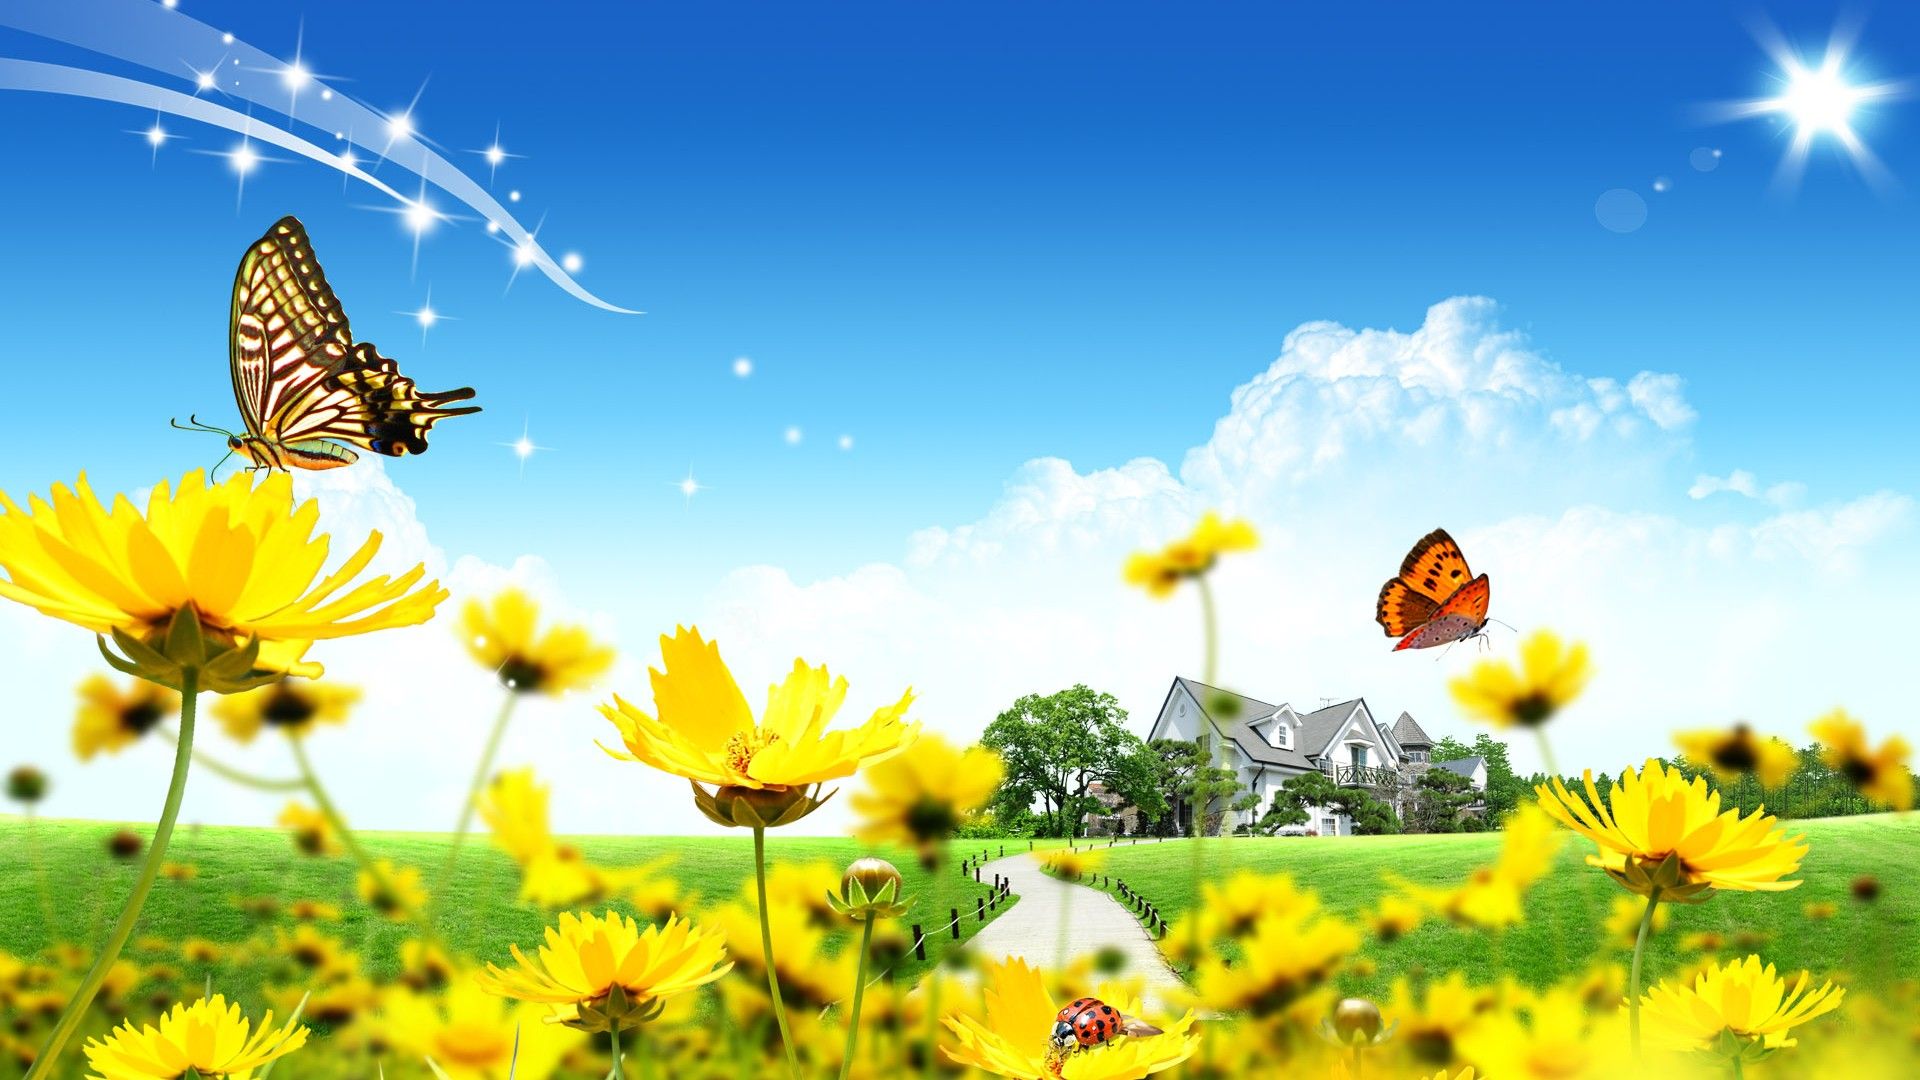 Free download The Sunny Spring Windows 81 Theme All For Windows 10